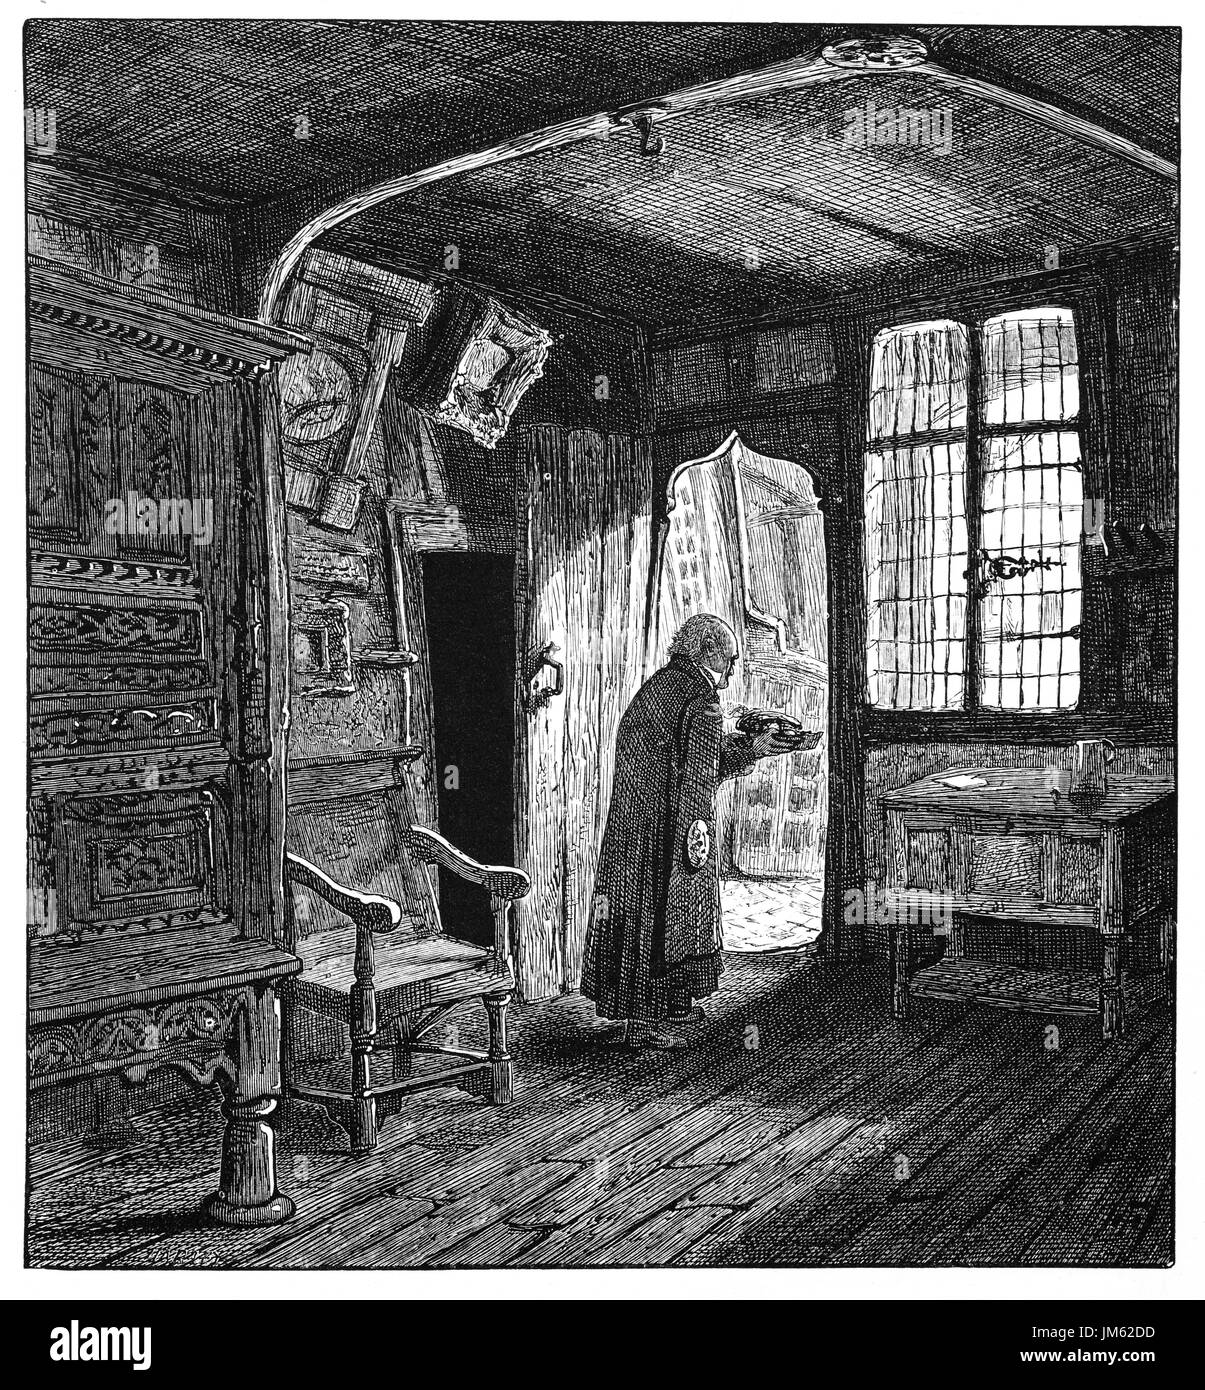 1870: The kitchen in Leicester's Hospital in Warwick.  The Hospital is an historic group of timber-framed buildings in the High Street dating mainly from the late 14th Century.  In the reign of Queen Elizabeth I it became, under the patronage of Robert Dudley, Earl of Leicester, a place of retirement for old warriors known as the Brethren. The Brethren and Master, who still live within the walls of the building, are a living legacy of almost 450 years of history.  Warwickshire, England. Stock Photo